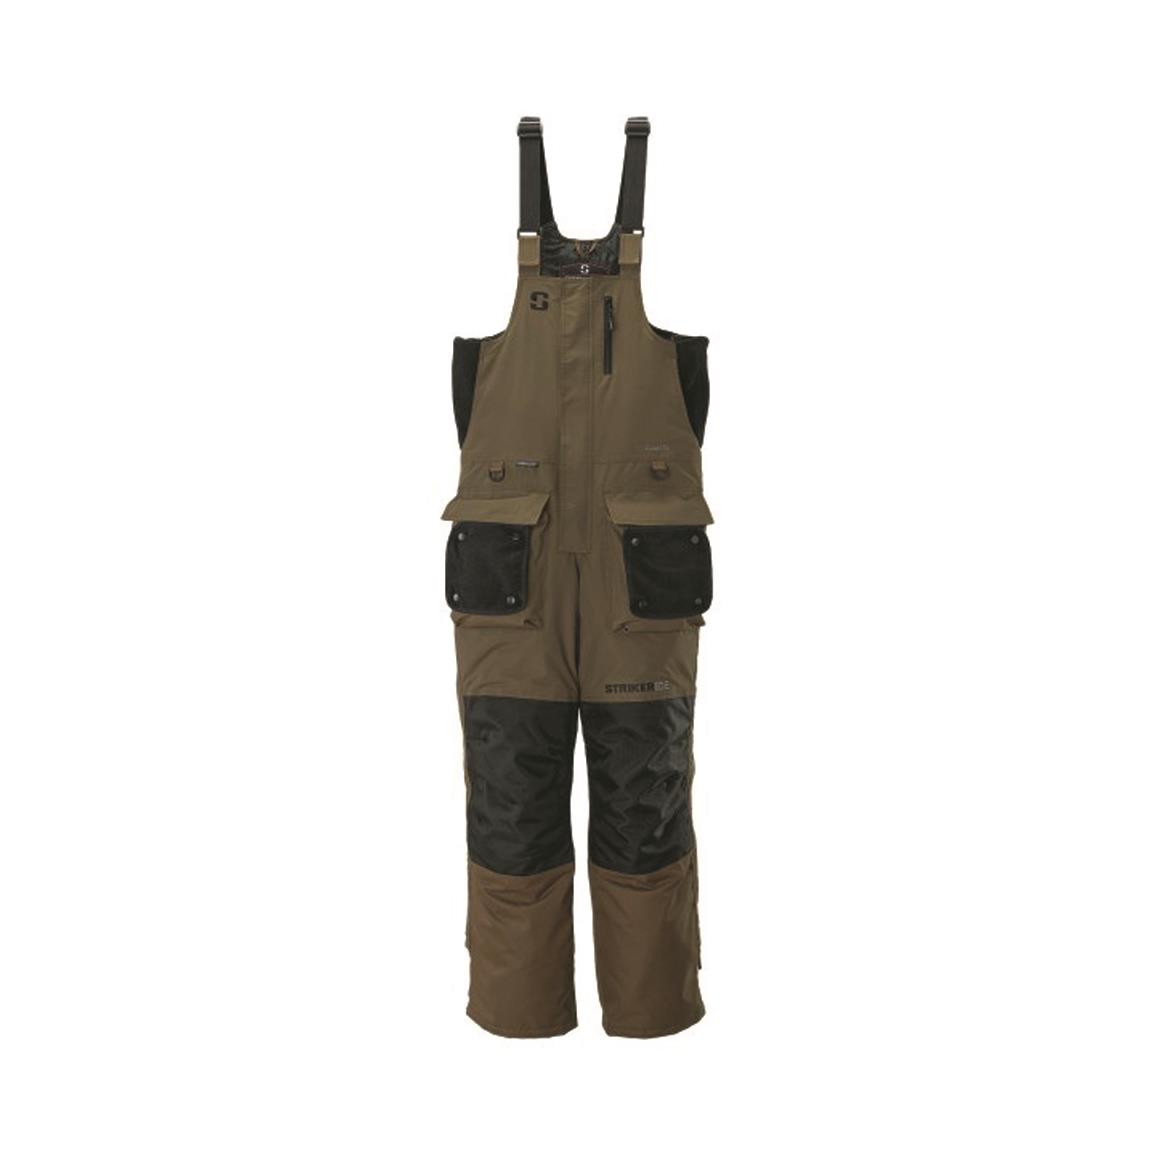 Striker Ice Men's Climate Insulated Waterproof Bibs with Sureflote -  706577, Insulated Pants, Overalls & Coveralls at Sportsman's Guide